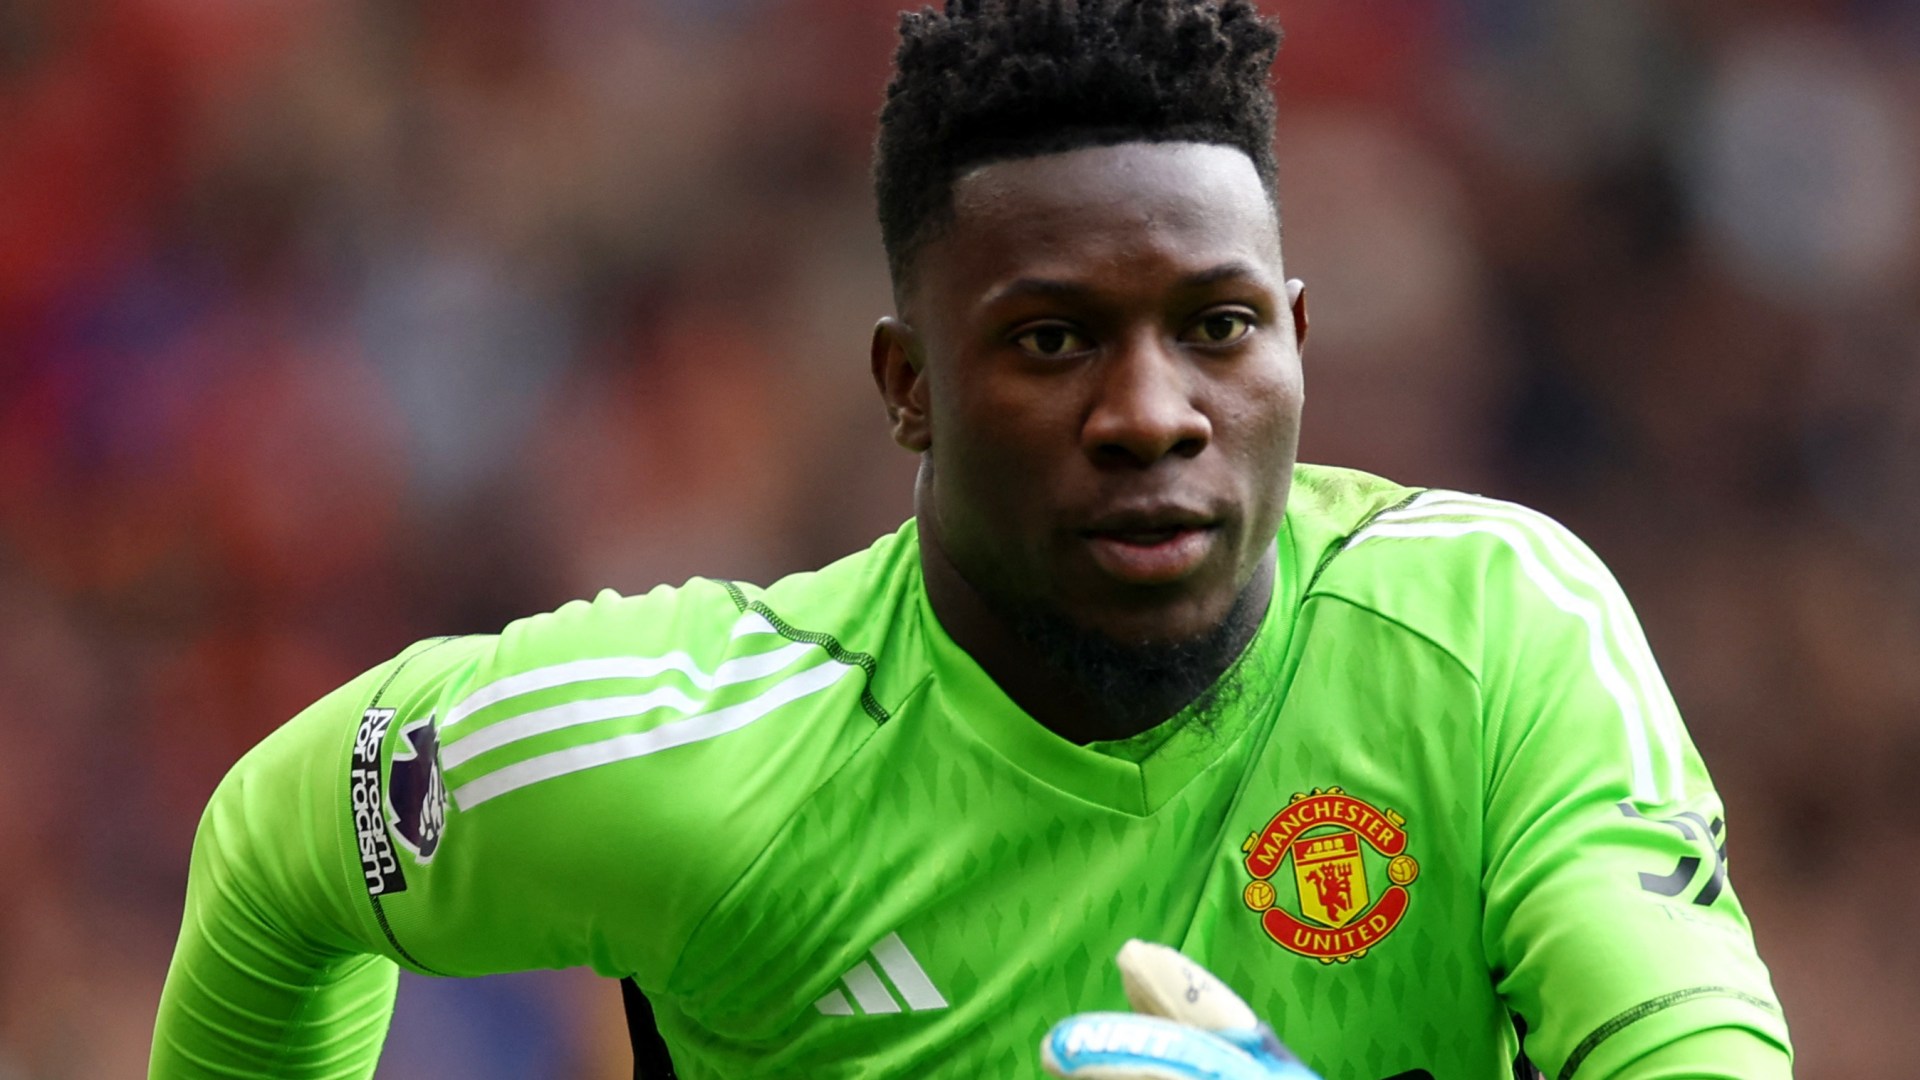 Onana Reflects on Challenging Debut Season with Manchester United Amidst Uncertain Future